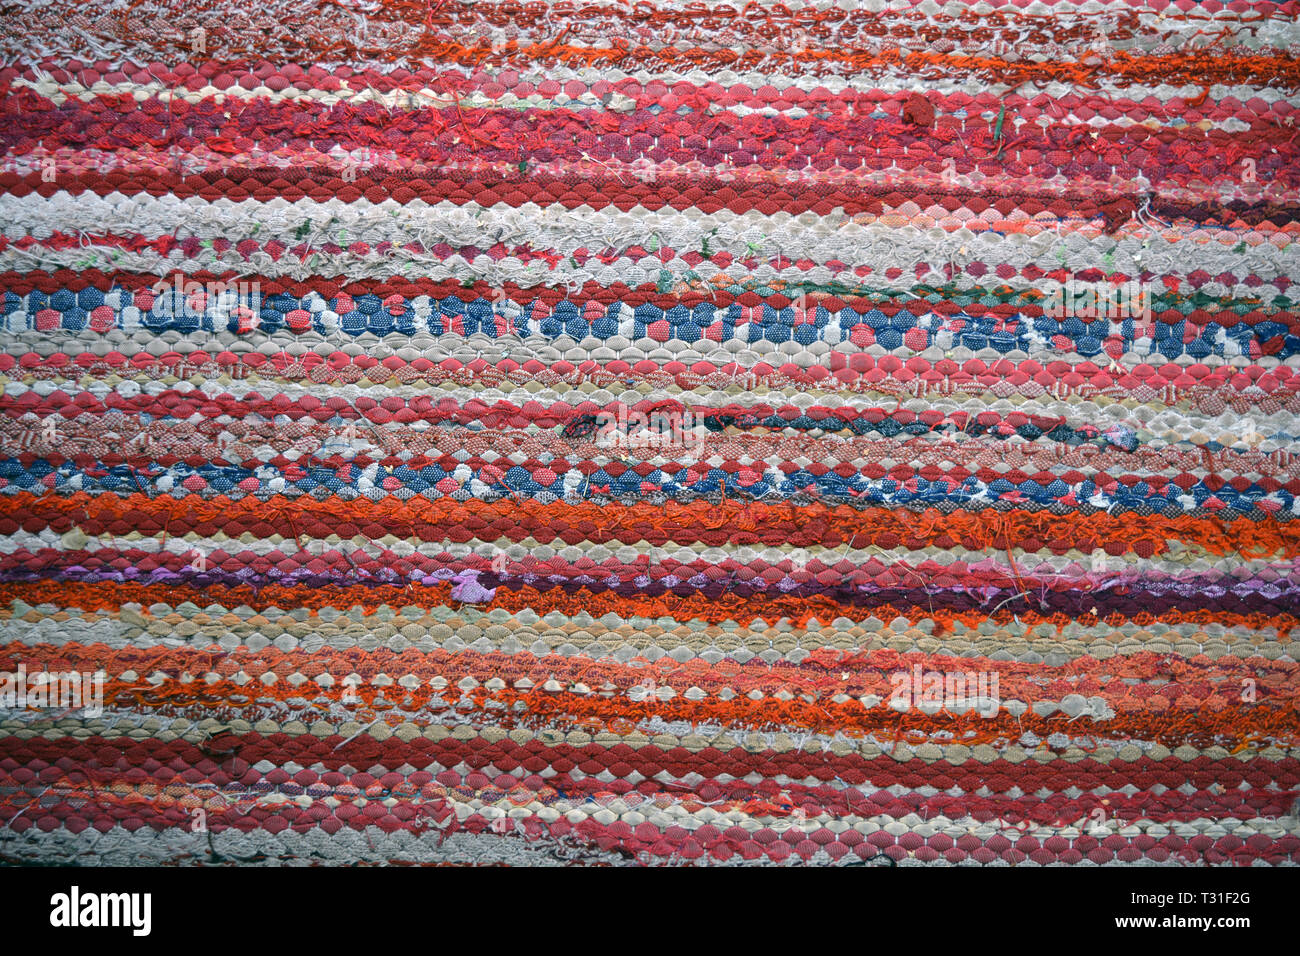 old knitted colorful carpet abstract background and texture Stock Photo